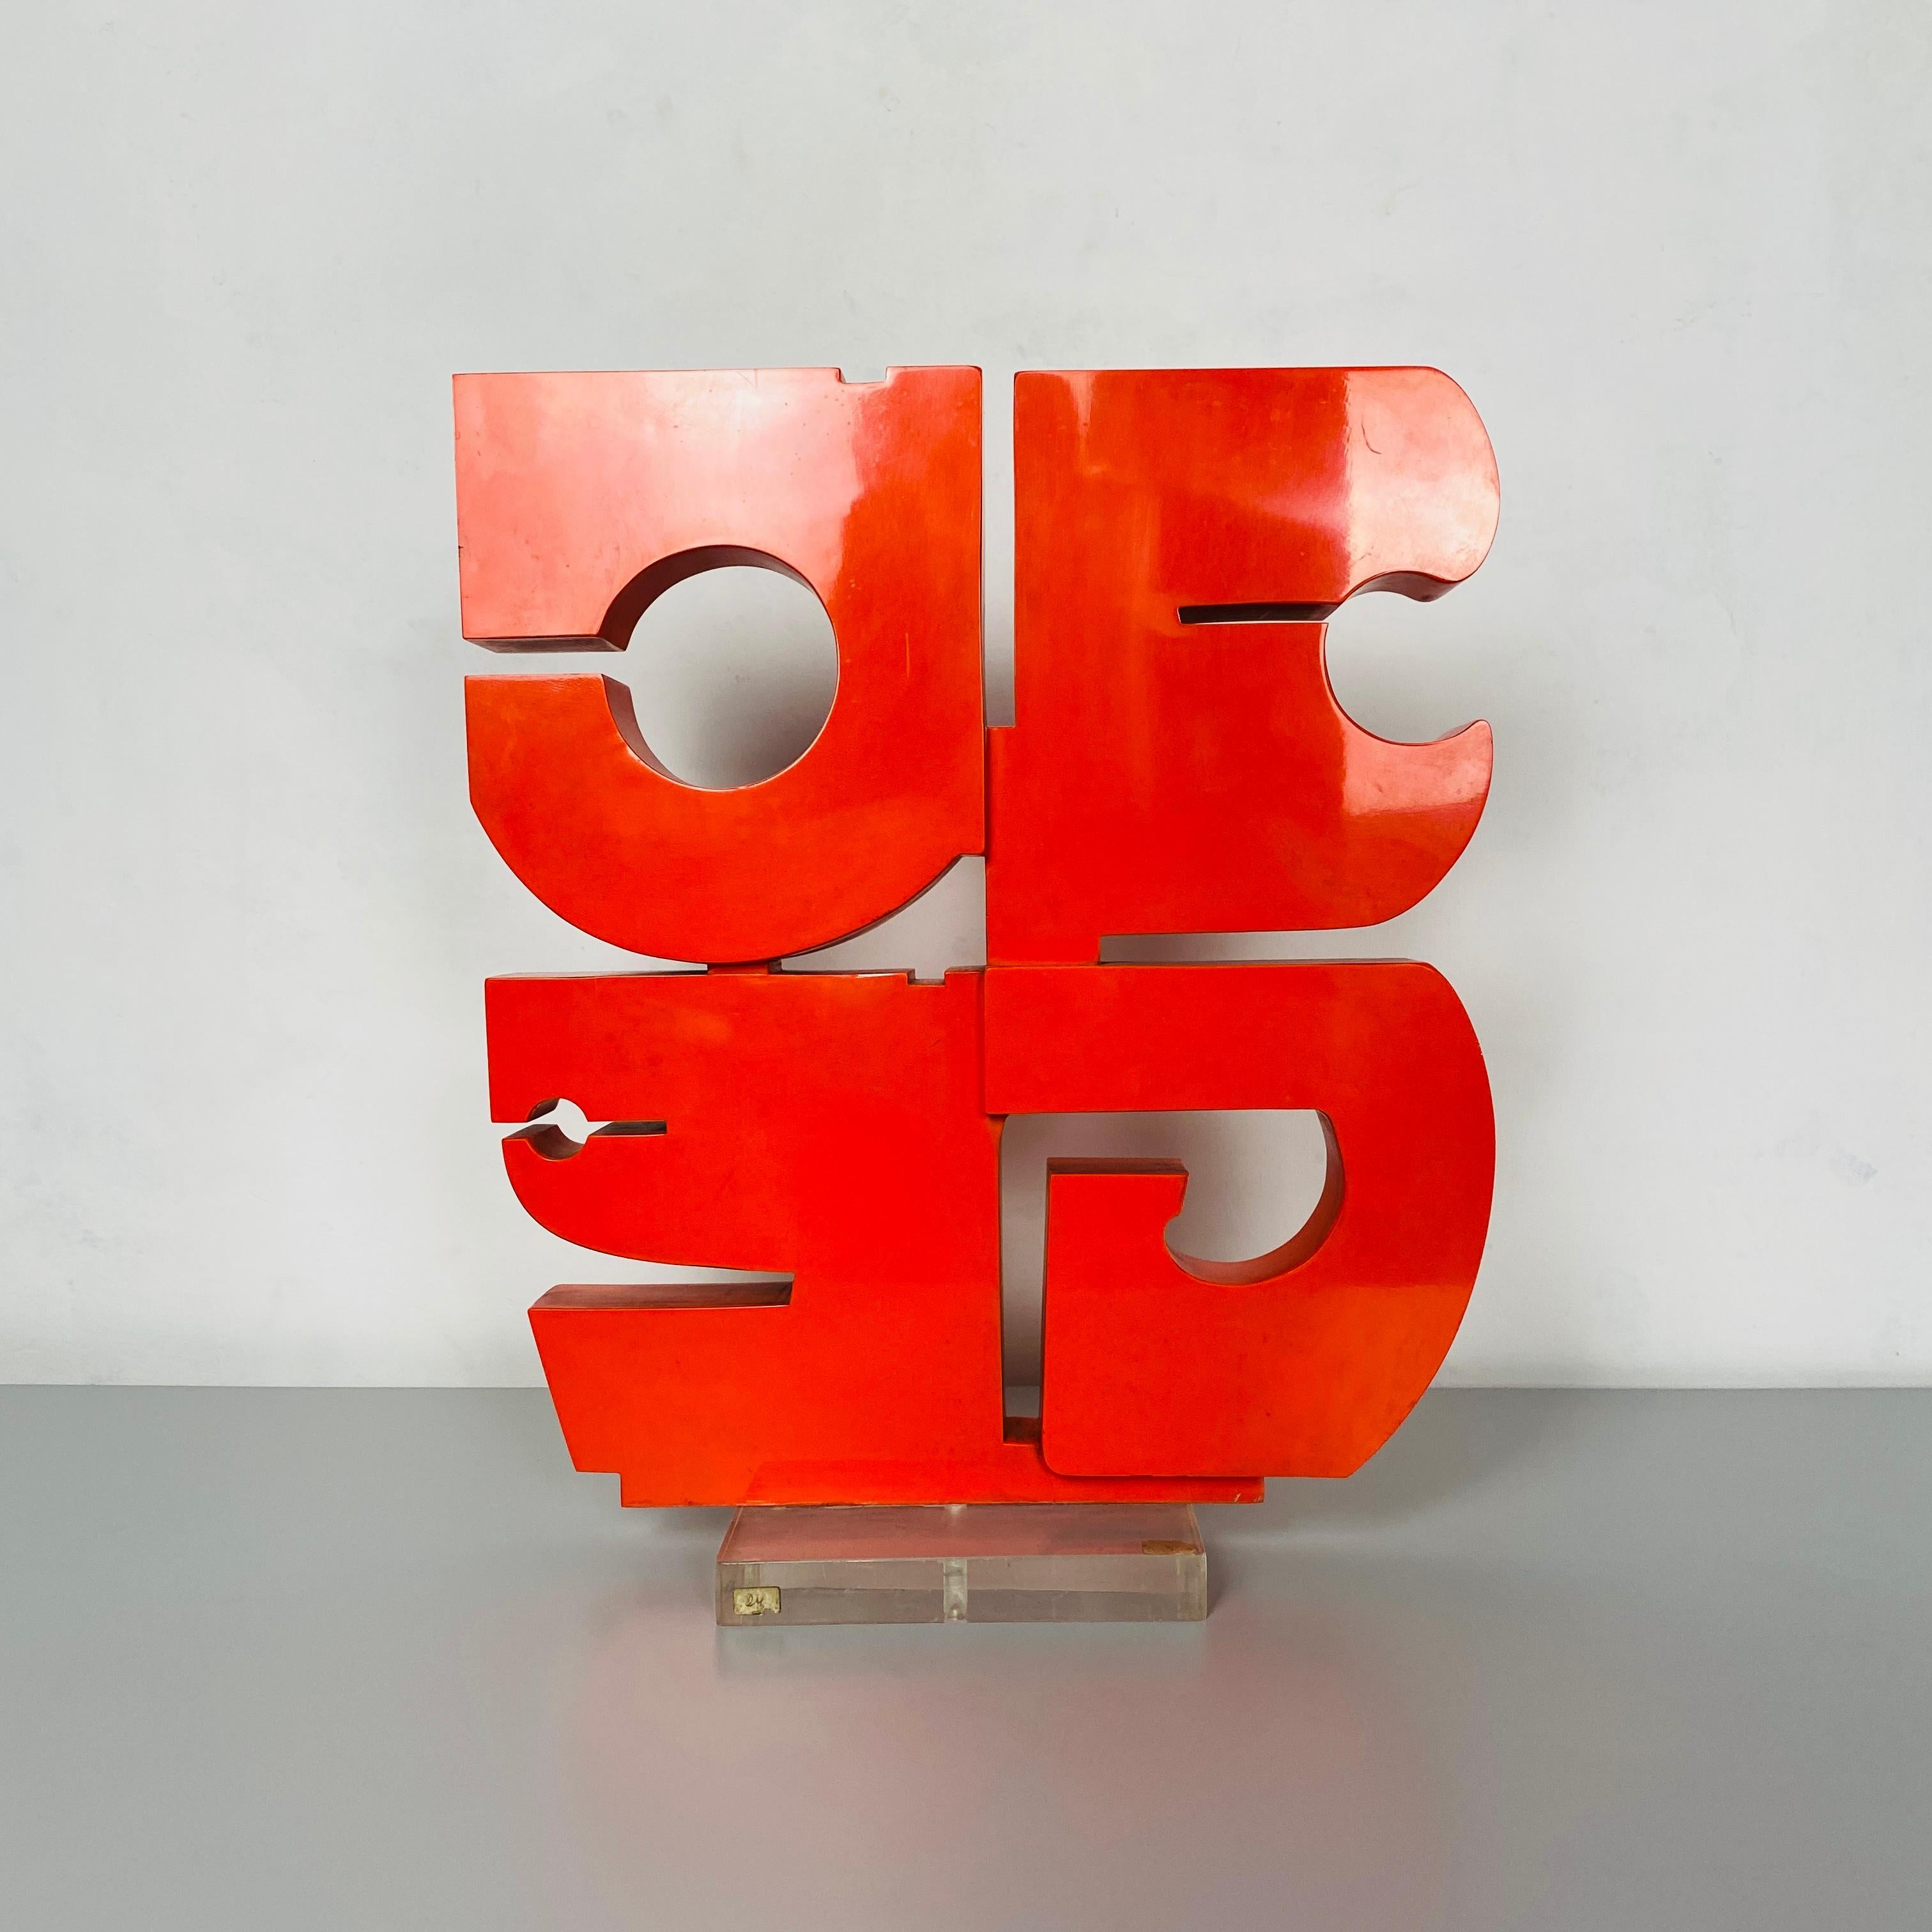 Italian Mid-Century Modern red plexiglass sculpture by Edmondo Cirillo, 1970s
Red plexiglass sculpture representing letters of the alphabet, supported by a transparent plexiglass base.
By Edmondo Cirillo.

There are some light scratches, good